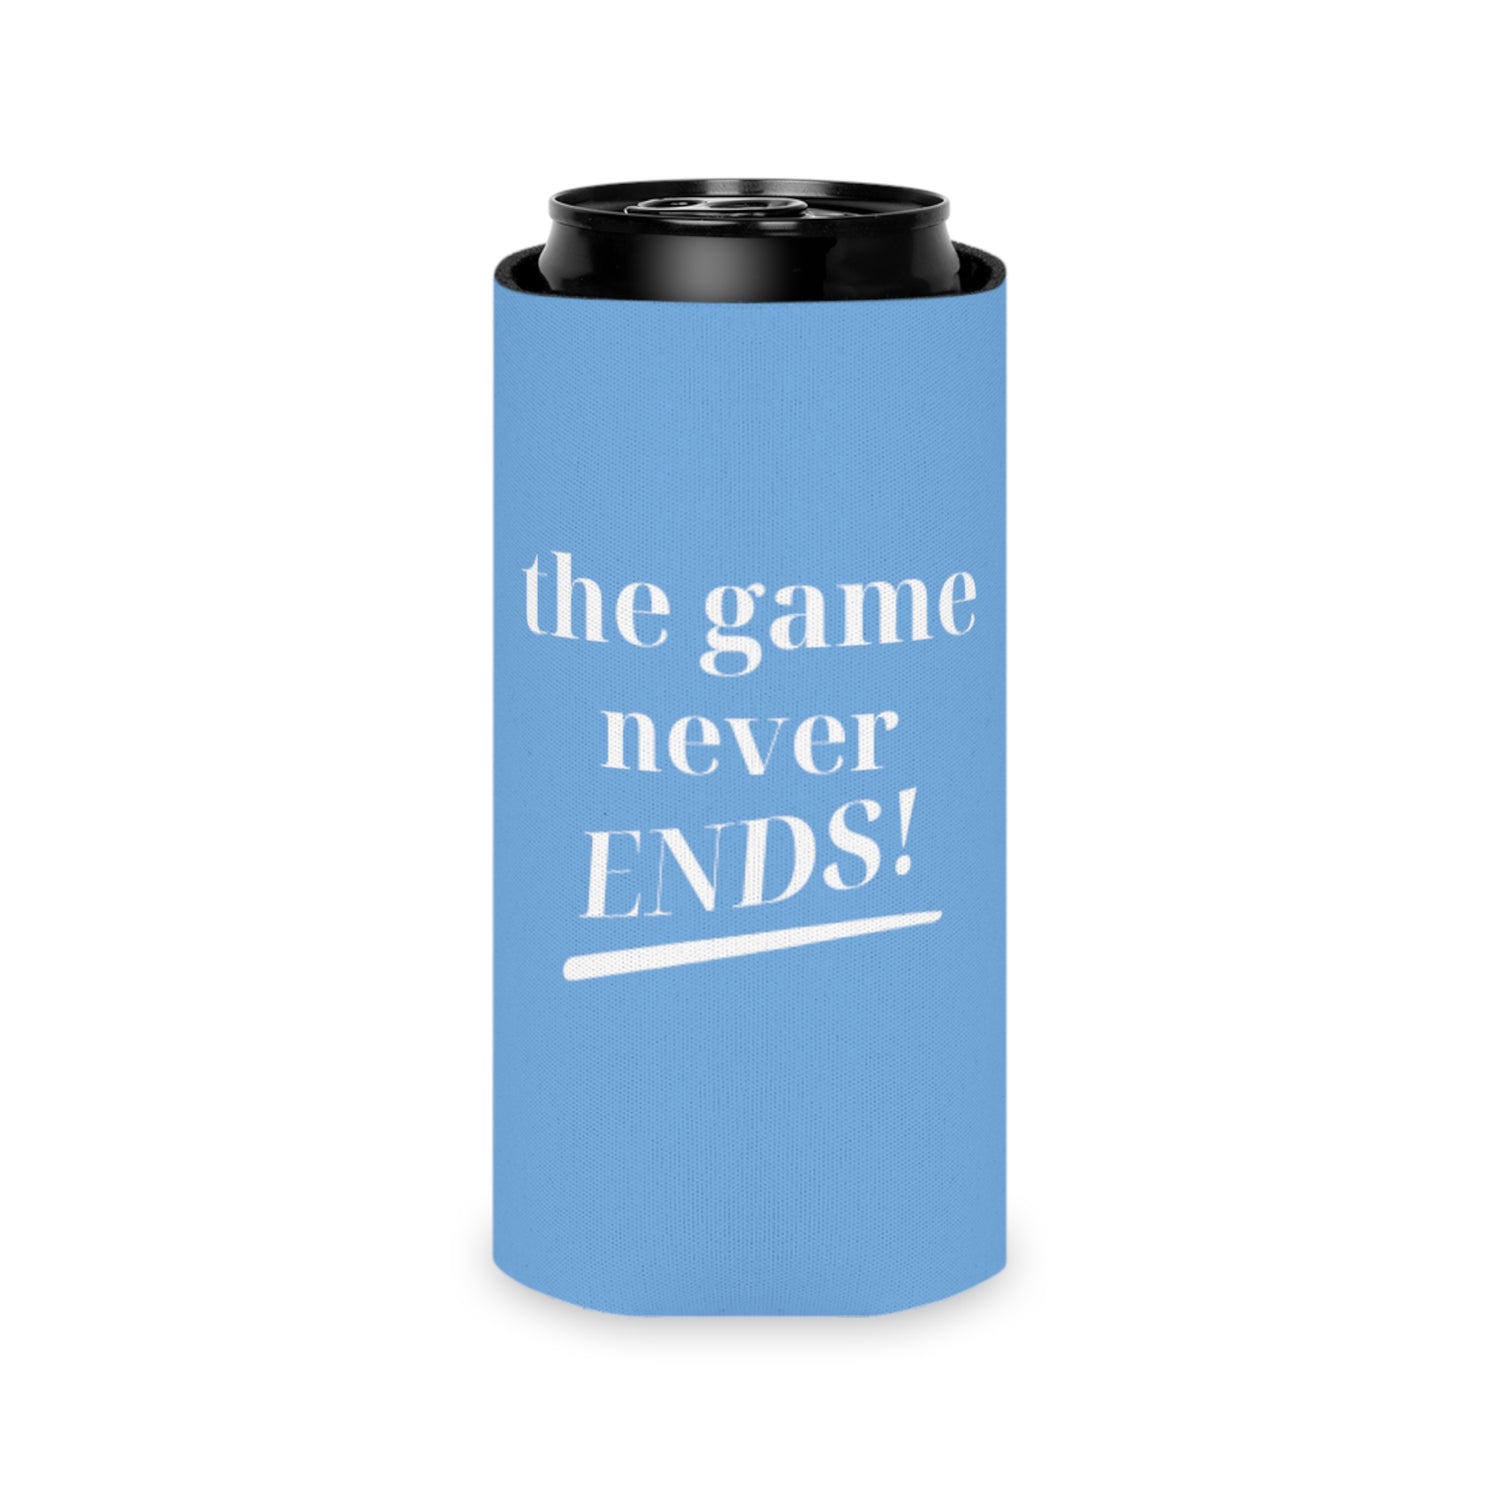 The Game Never Ends! Koozie